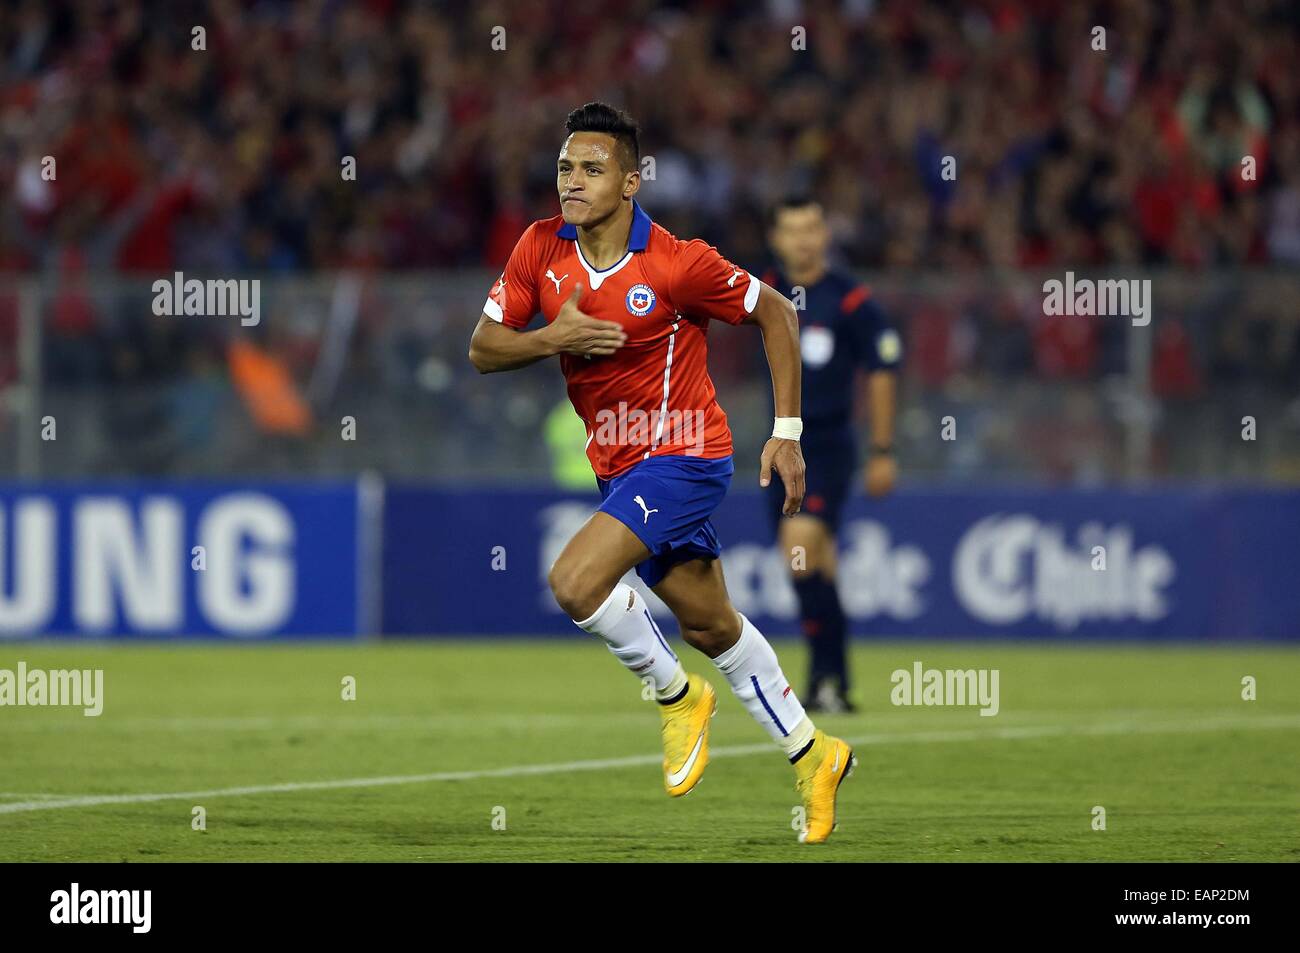 Santiago, Chile. 18th Nov, 2014. Image provided by National Association of Professional Soccer (ANFP, for its acronym in Spanish) of Chile shows Chile's Alexis Sanchez celebrating his goal during a friendly match against Uruguay, at Monumental Stadium, in Santiago, Chile, on Nov. 18, 2014. © ANFP/Xinhua/Alamy Live News Stock Photo